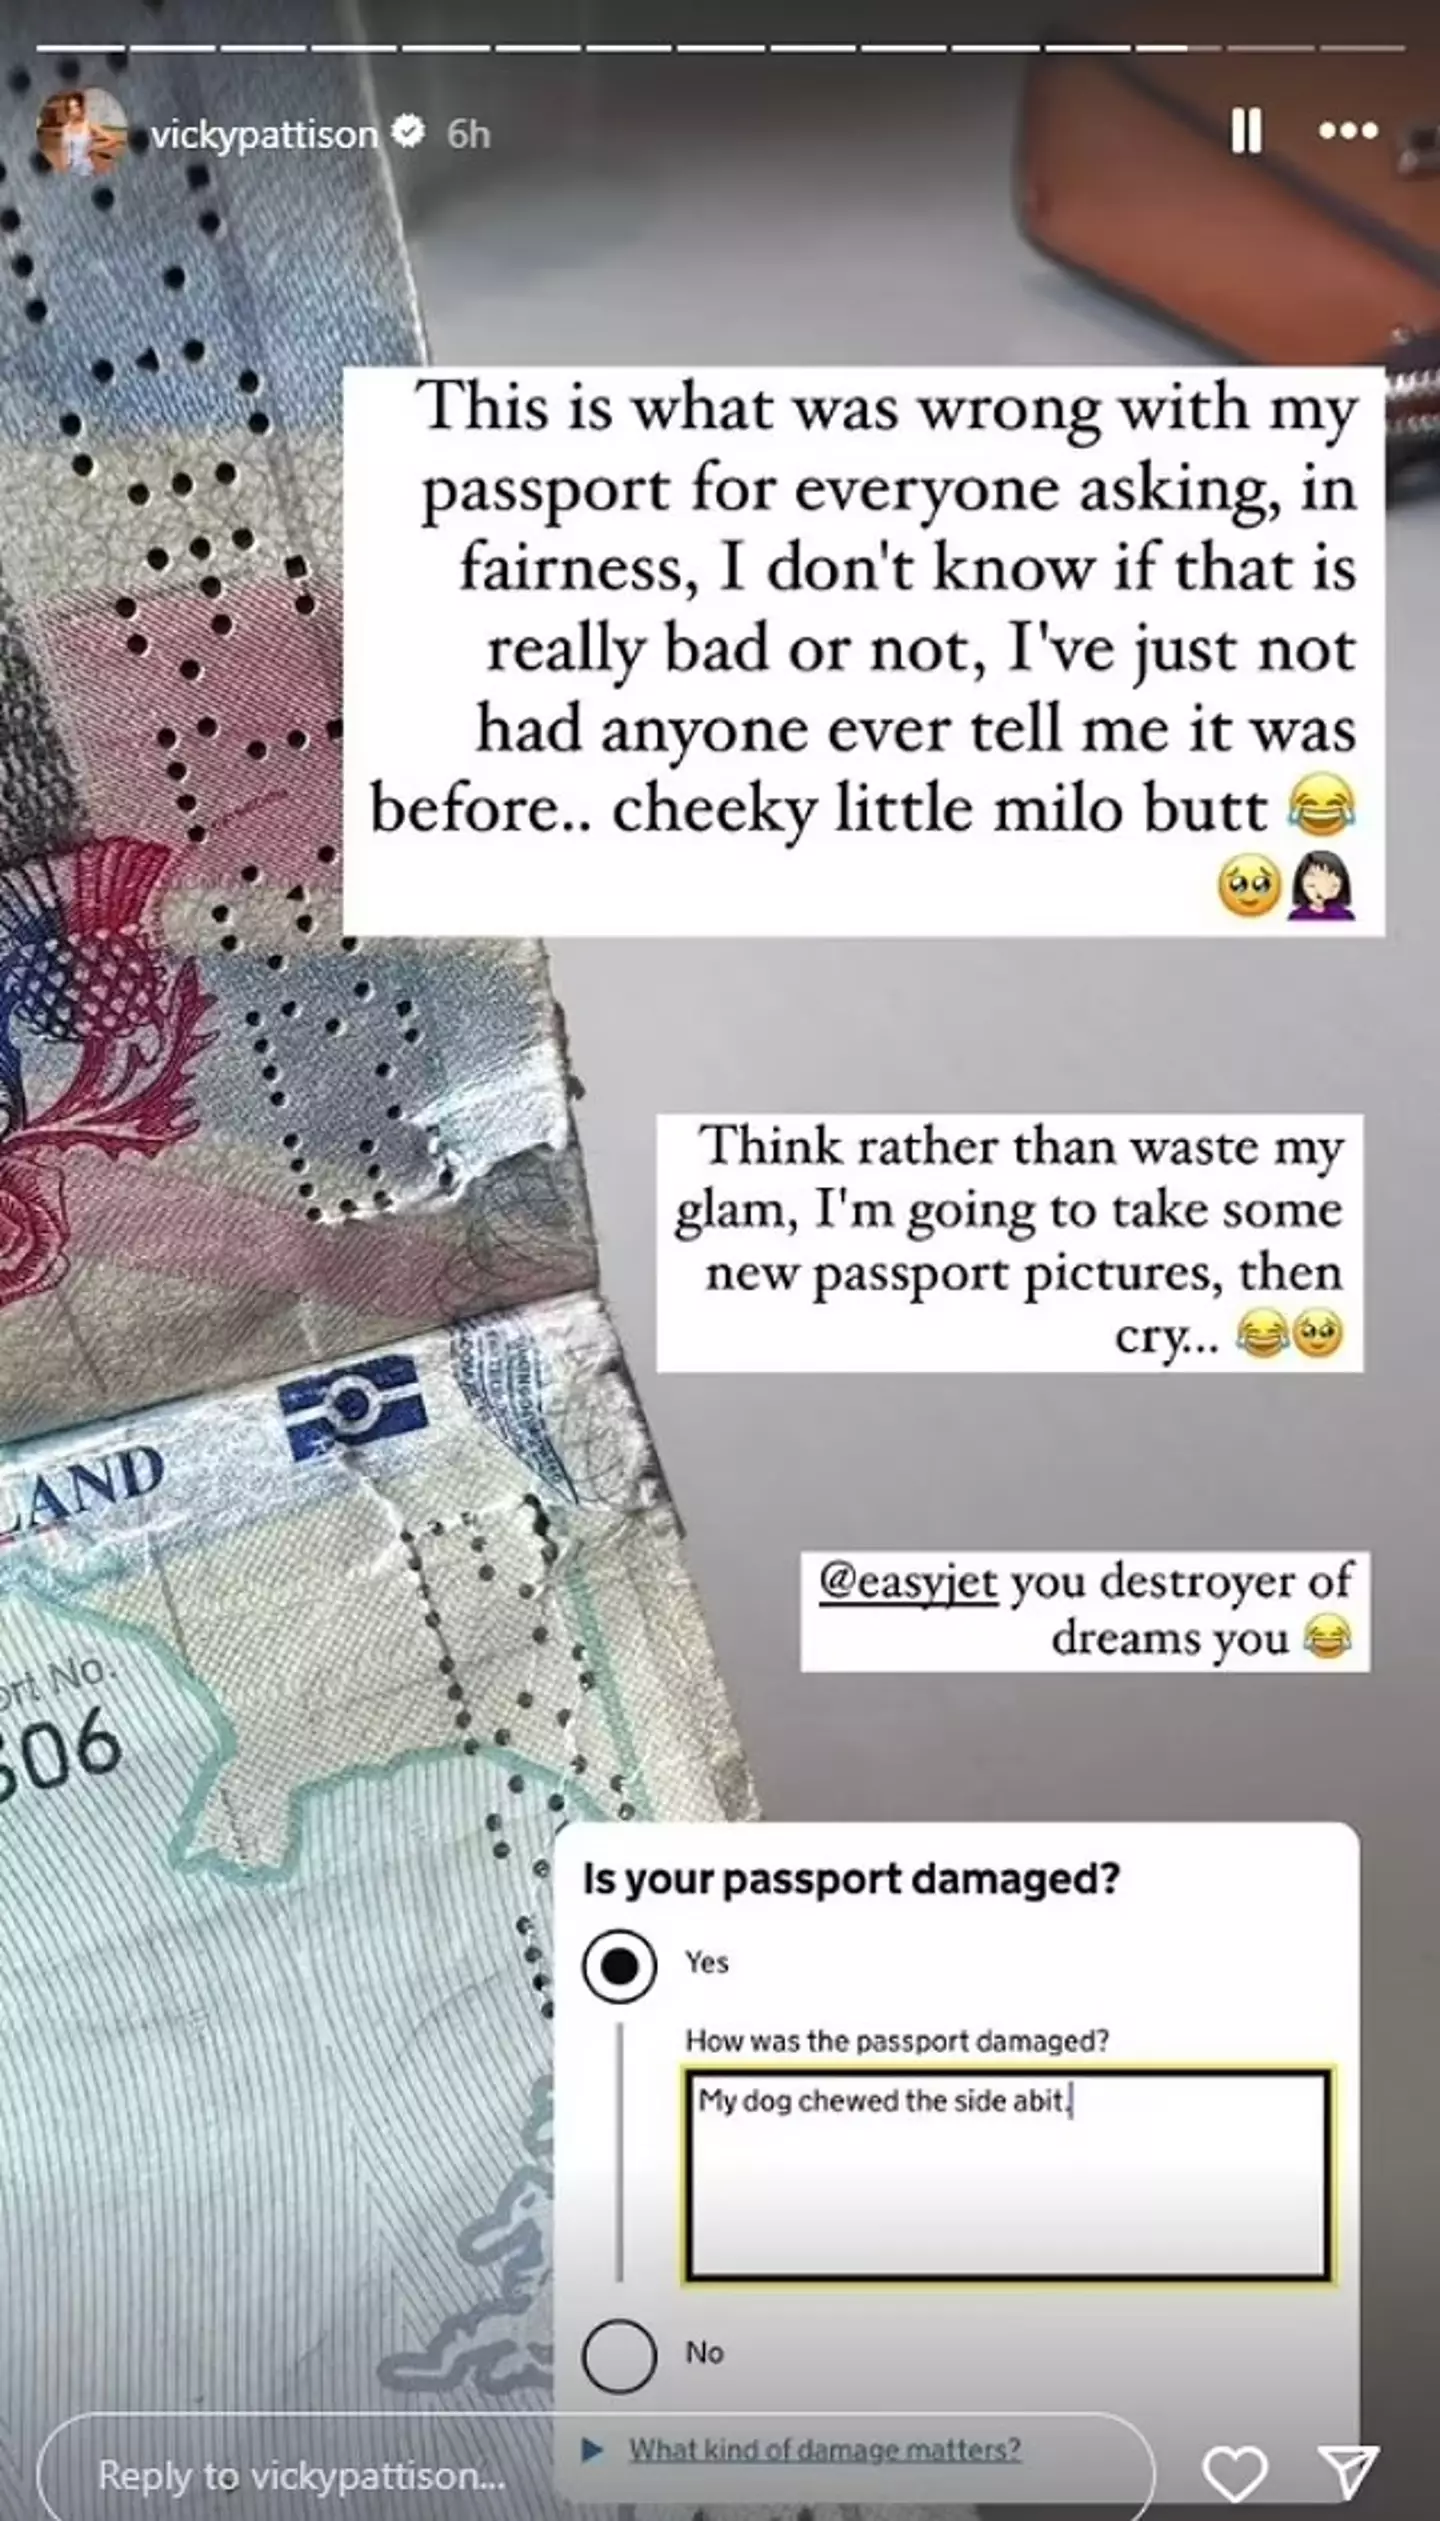 Pattison shared a photo of the damage her dog has done to her passport (Instagram/@vickypattison)